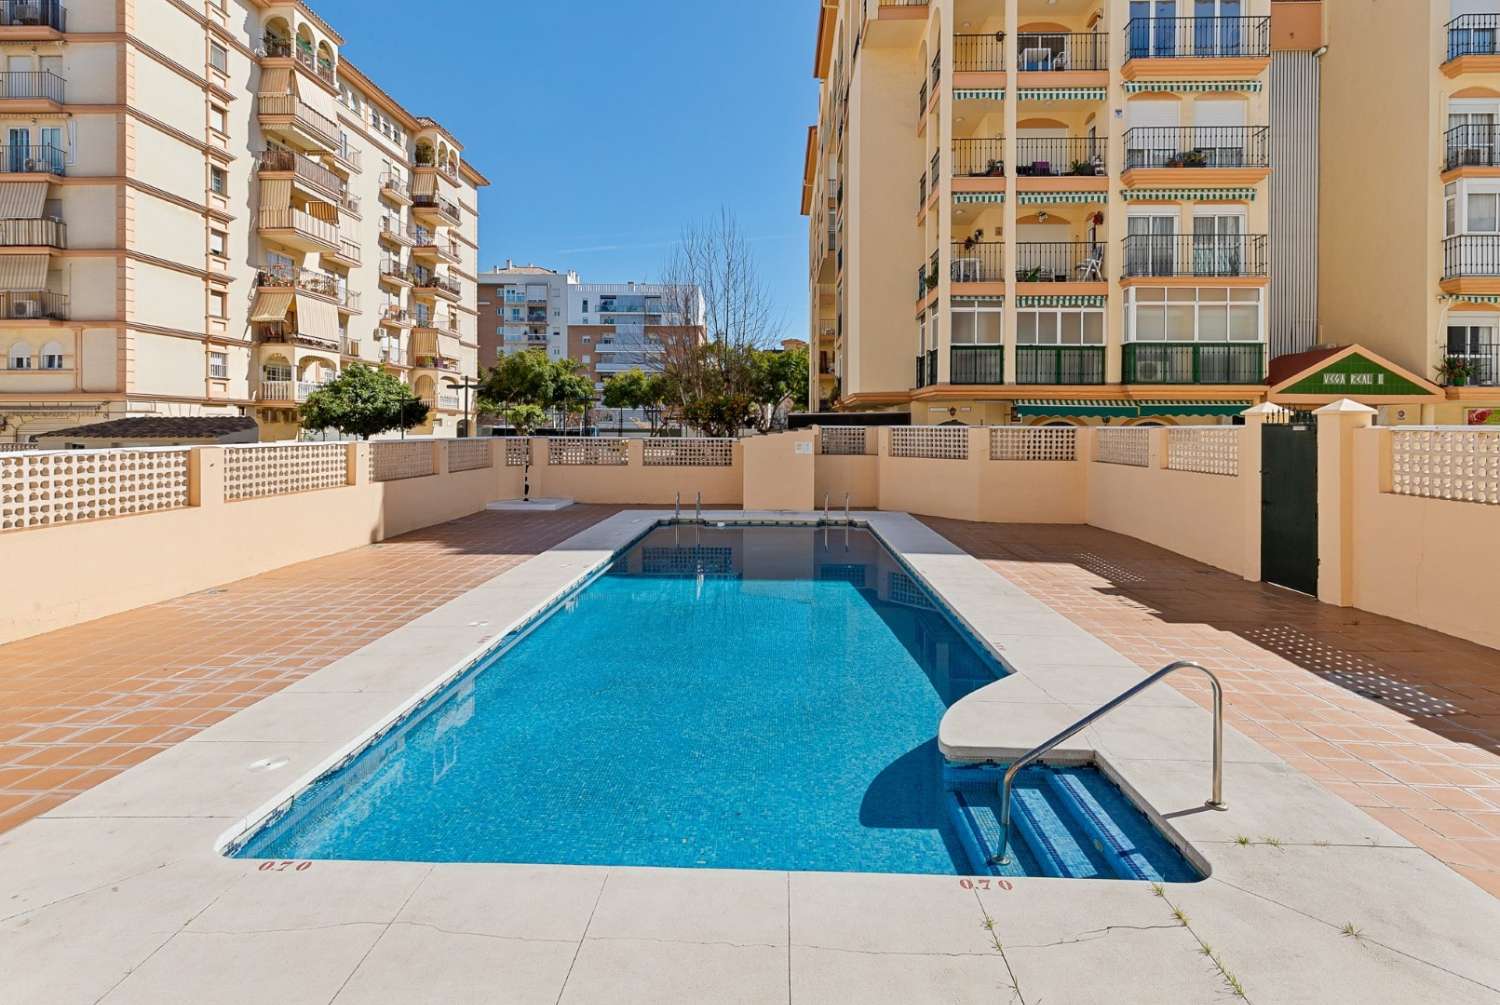 Bright Apartment is centrally located near Plaza Hispanidad and about 450 meters from the beach.